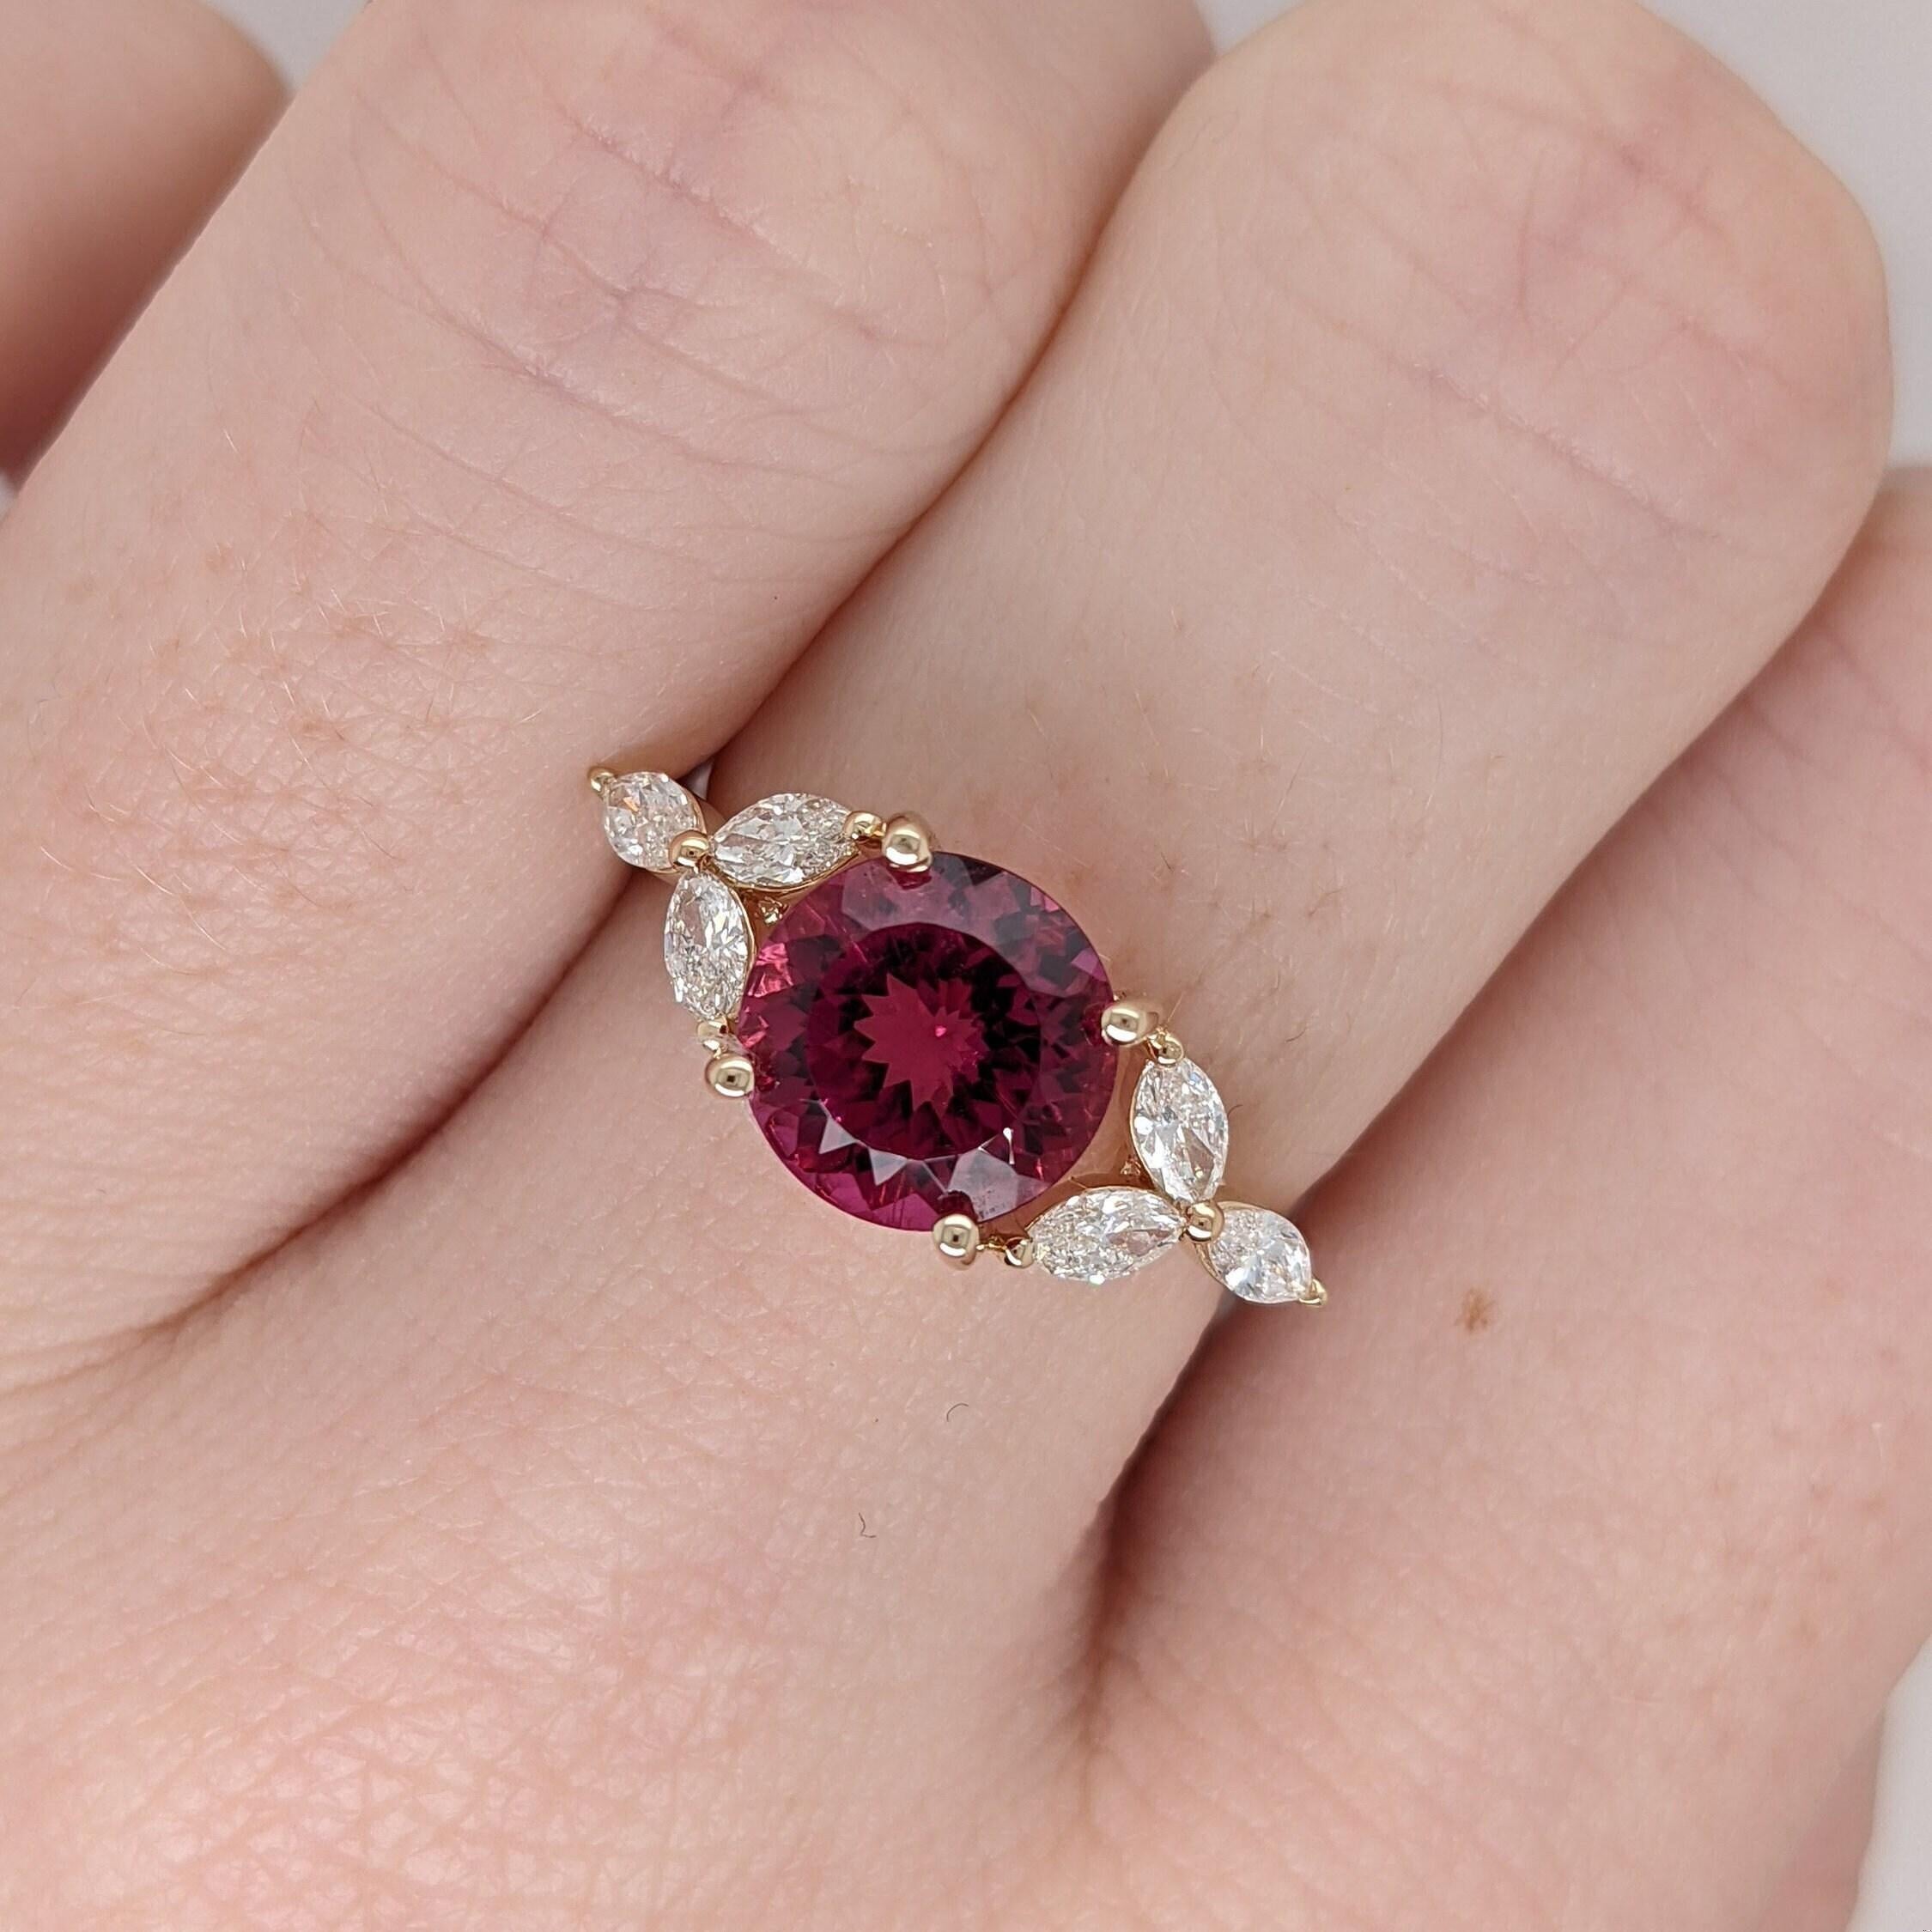 2ct Rubellite Tourmaline Ring w Earth Mined Diamonds in Solid 14k Gold Round 8mm In New Condition For Sale In Columbus, OH